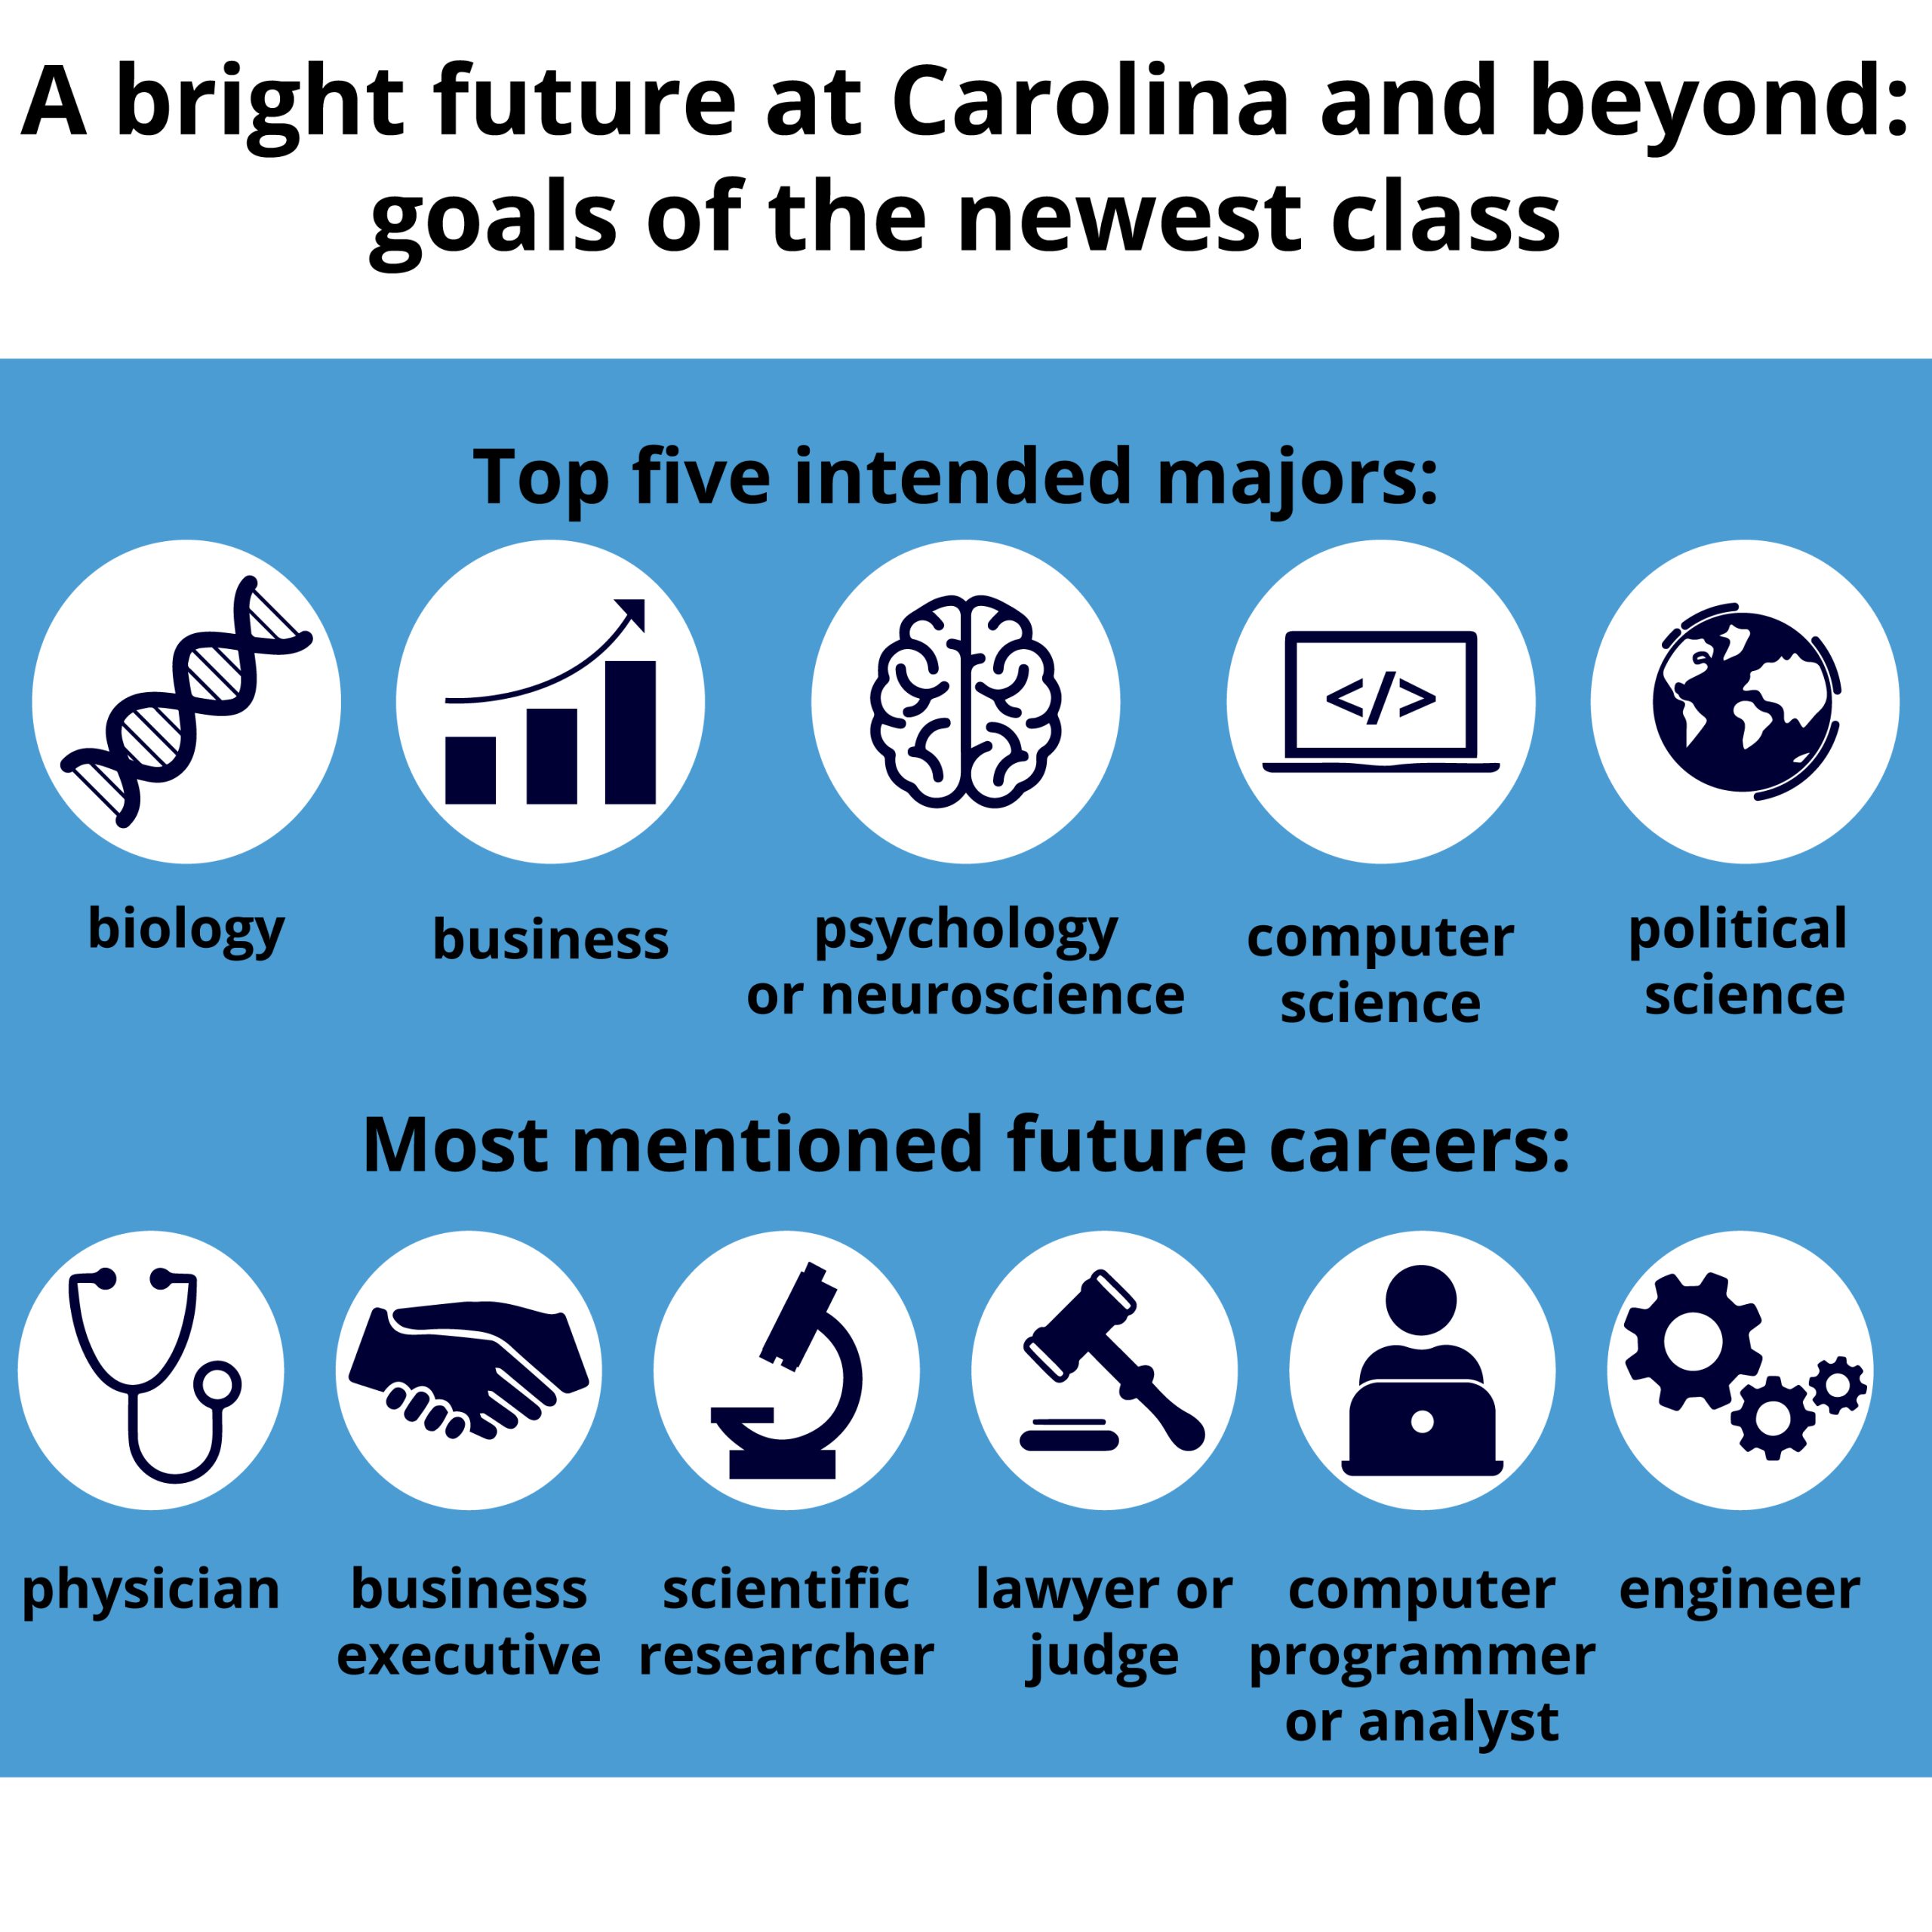 Graphic showing icons for the top-five intended majors at Carolina: biology, business, psychology or neuroscience, computer science, political science. Also most mentioned future careers: physician, business executive, scientific researcher, lawyer or judge, computer programmer or analyst, engineer.